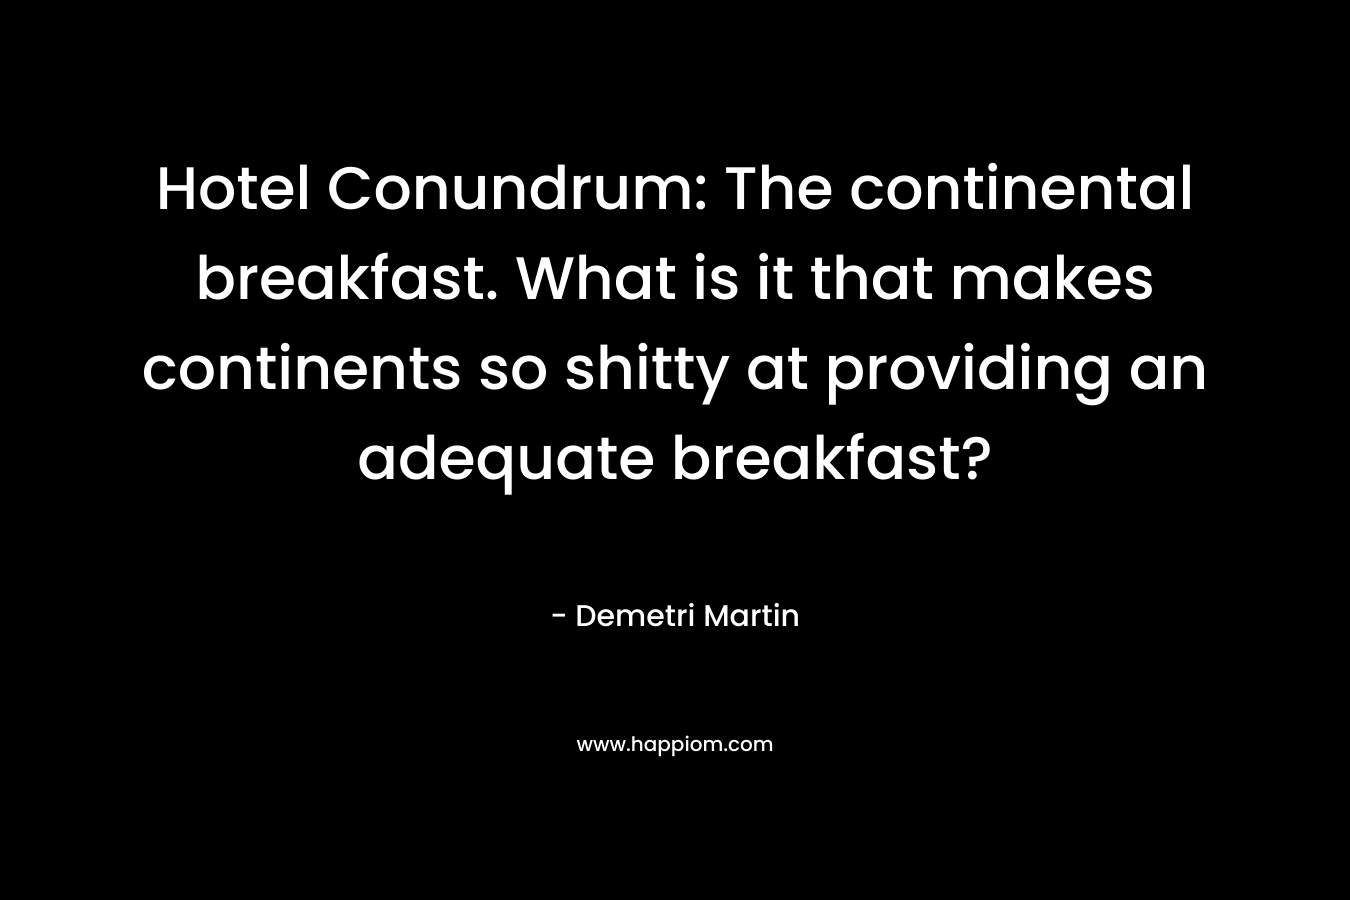 Hotel Conundrum: The continental breakfast. What is it that makes continents so shitty at providing an adequate breakfast? – Demetri Martin